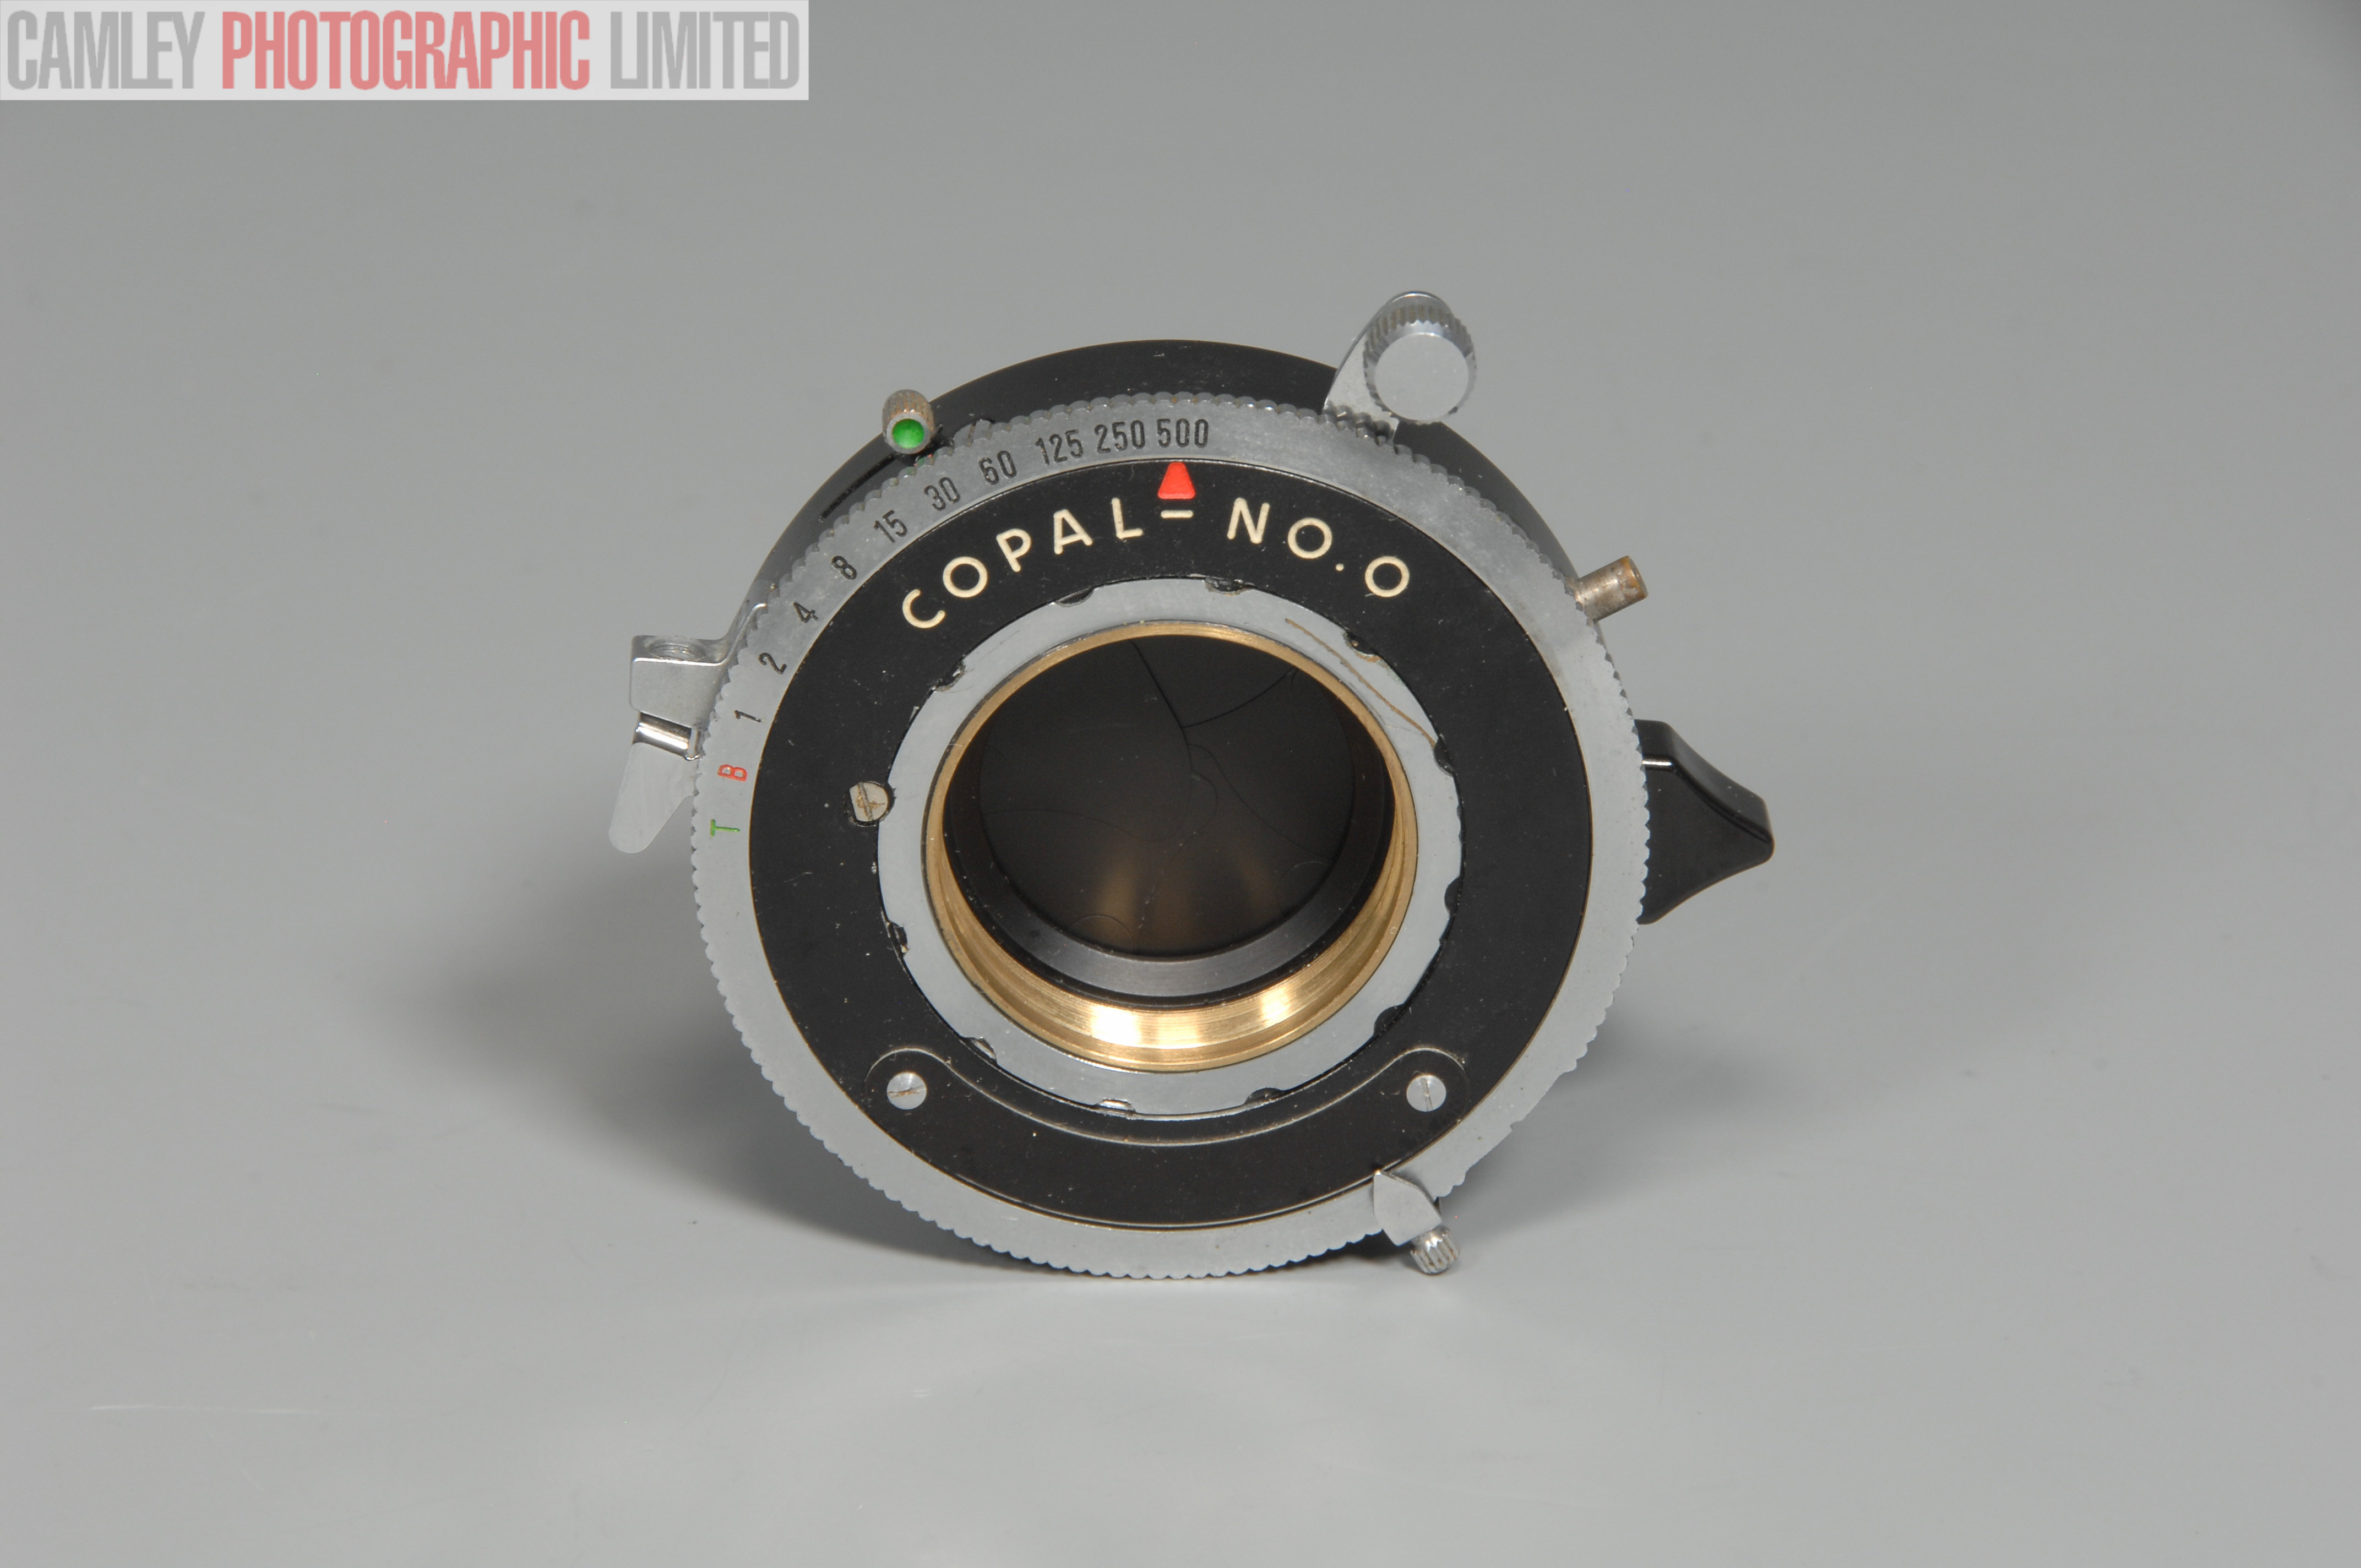 Copal #0 Large Format Lens Shutter. Tested  Calibrated. Graded: EXC+  [#10250] – Camley Photographic Limited